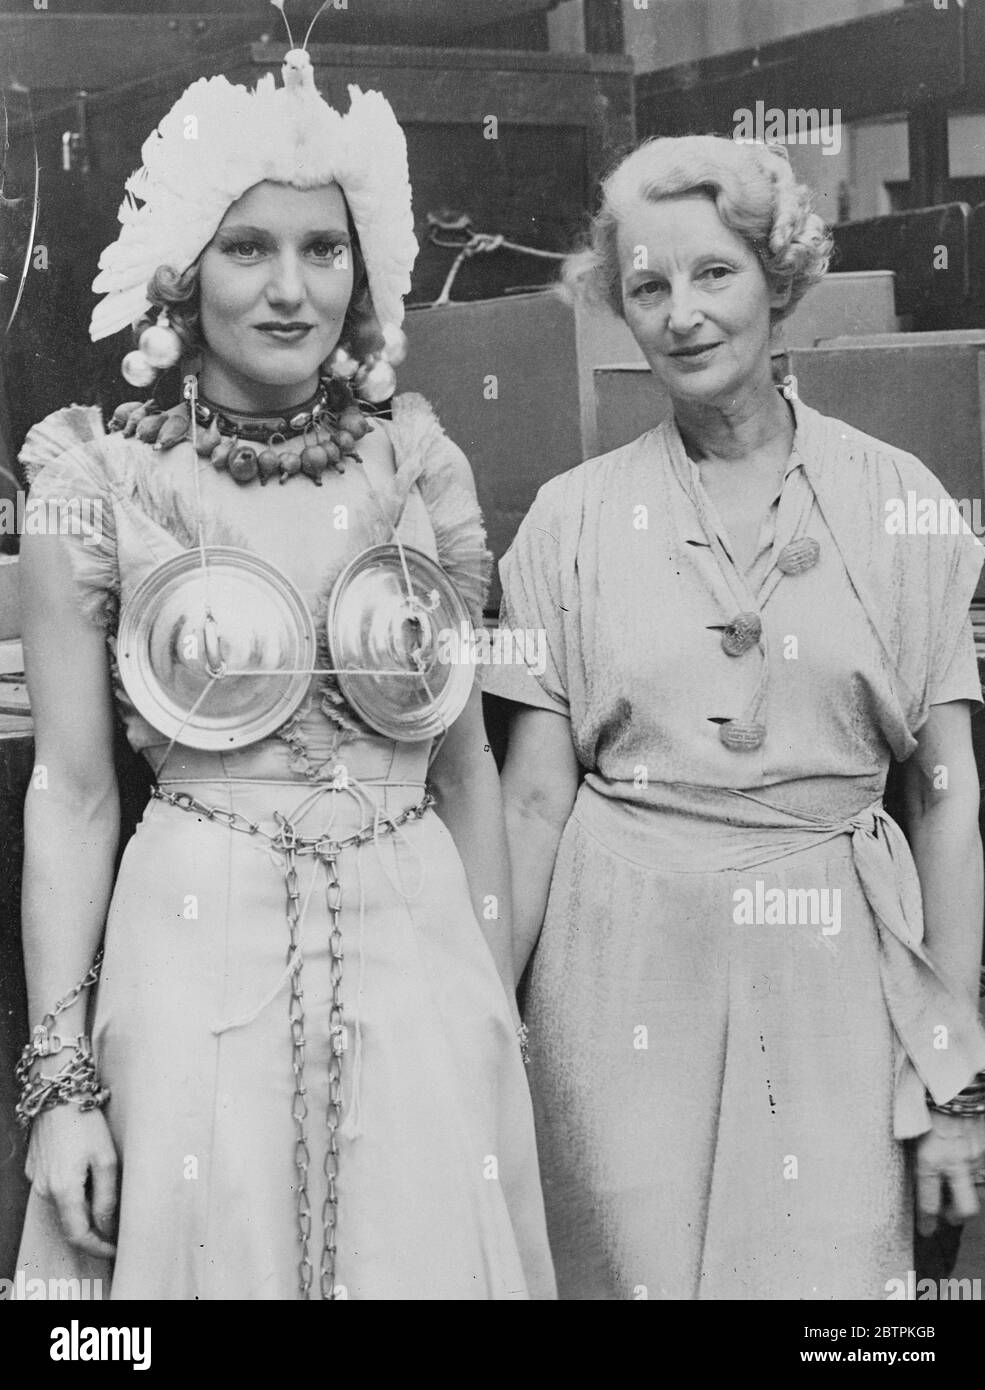 Cleopatra of the Kitchen . Waering a collar and necklace of apples , turnips and onions, and girdled with a light chain , Constance Cummings , the film actress , shows her mother the motley costume she wears in her latest American film . Stock Photo